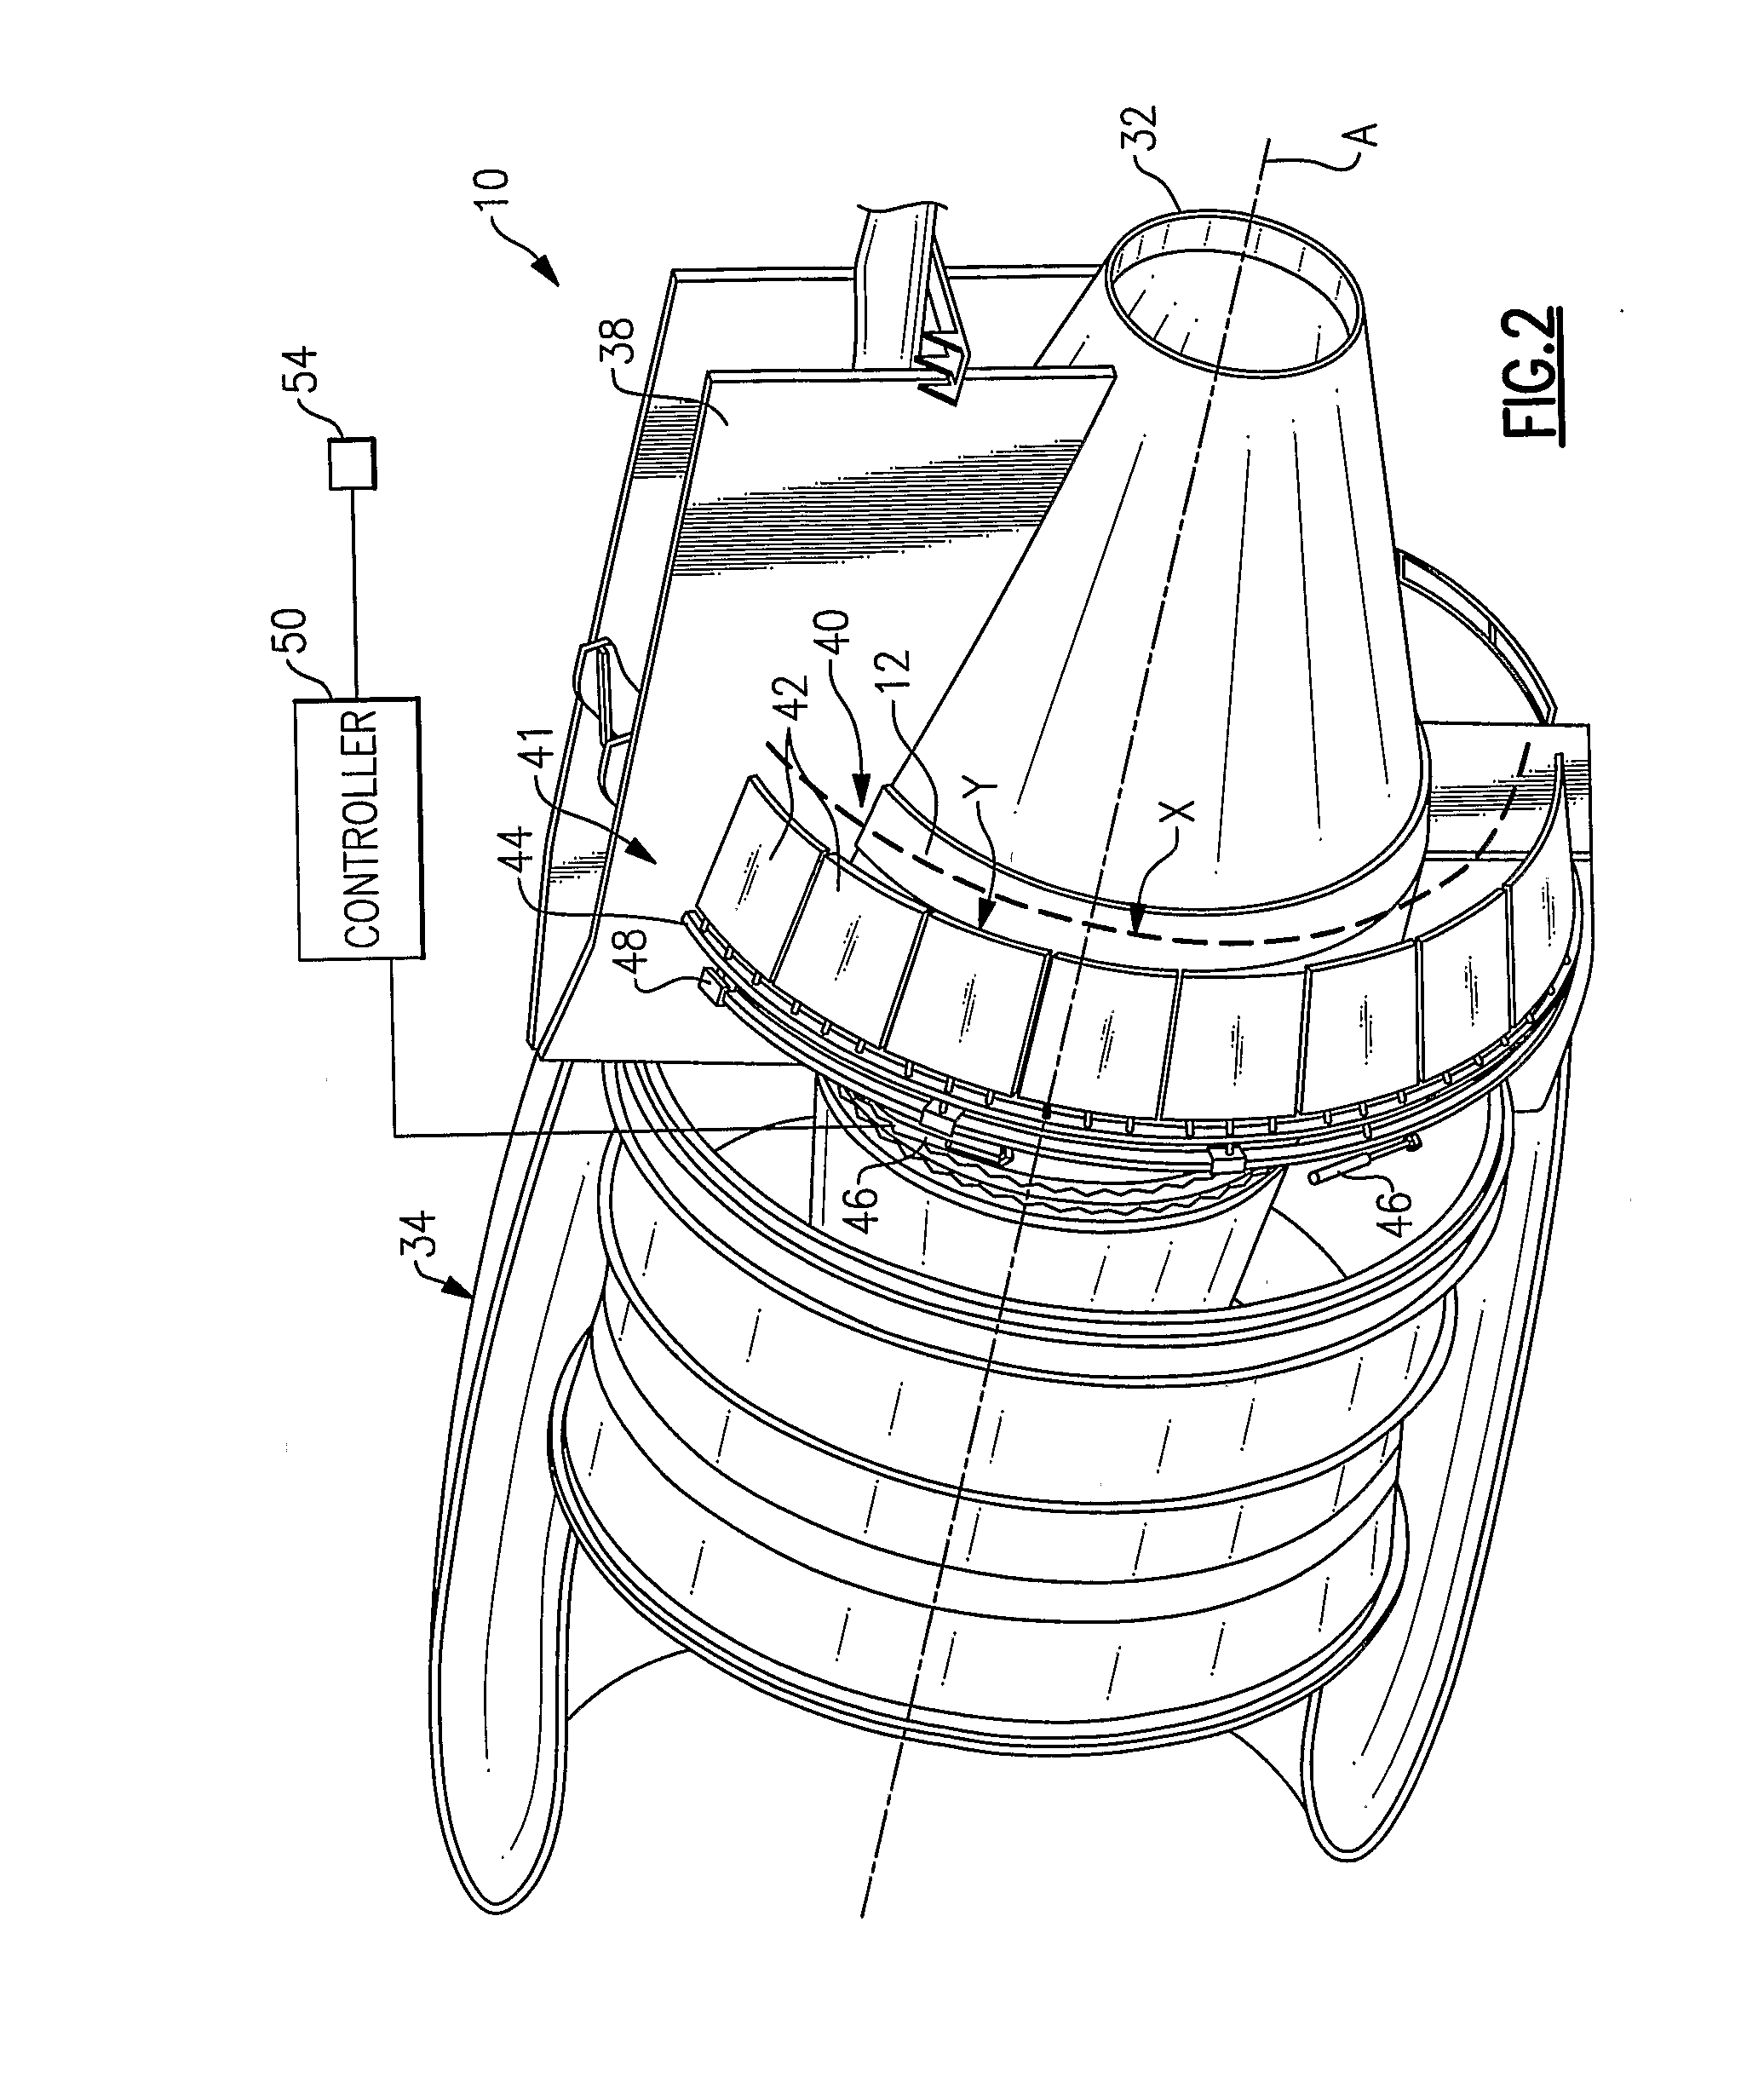 Turbofan engine with variable area fan nozzle and low spool generator for emergency power generation and method for providing emergency power